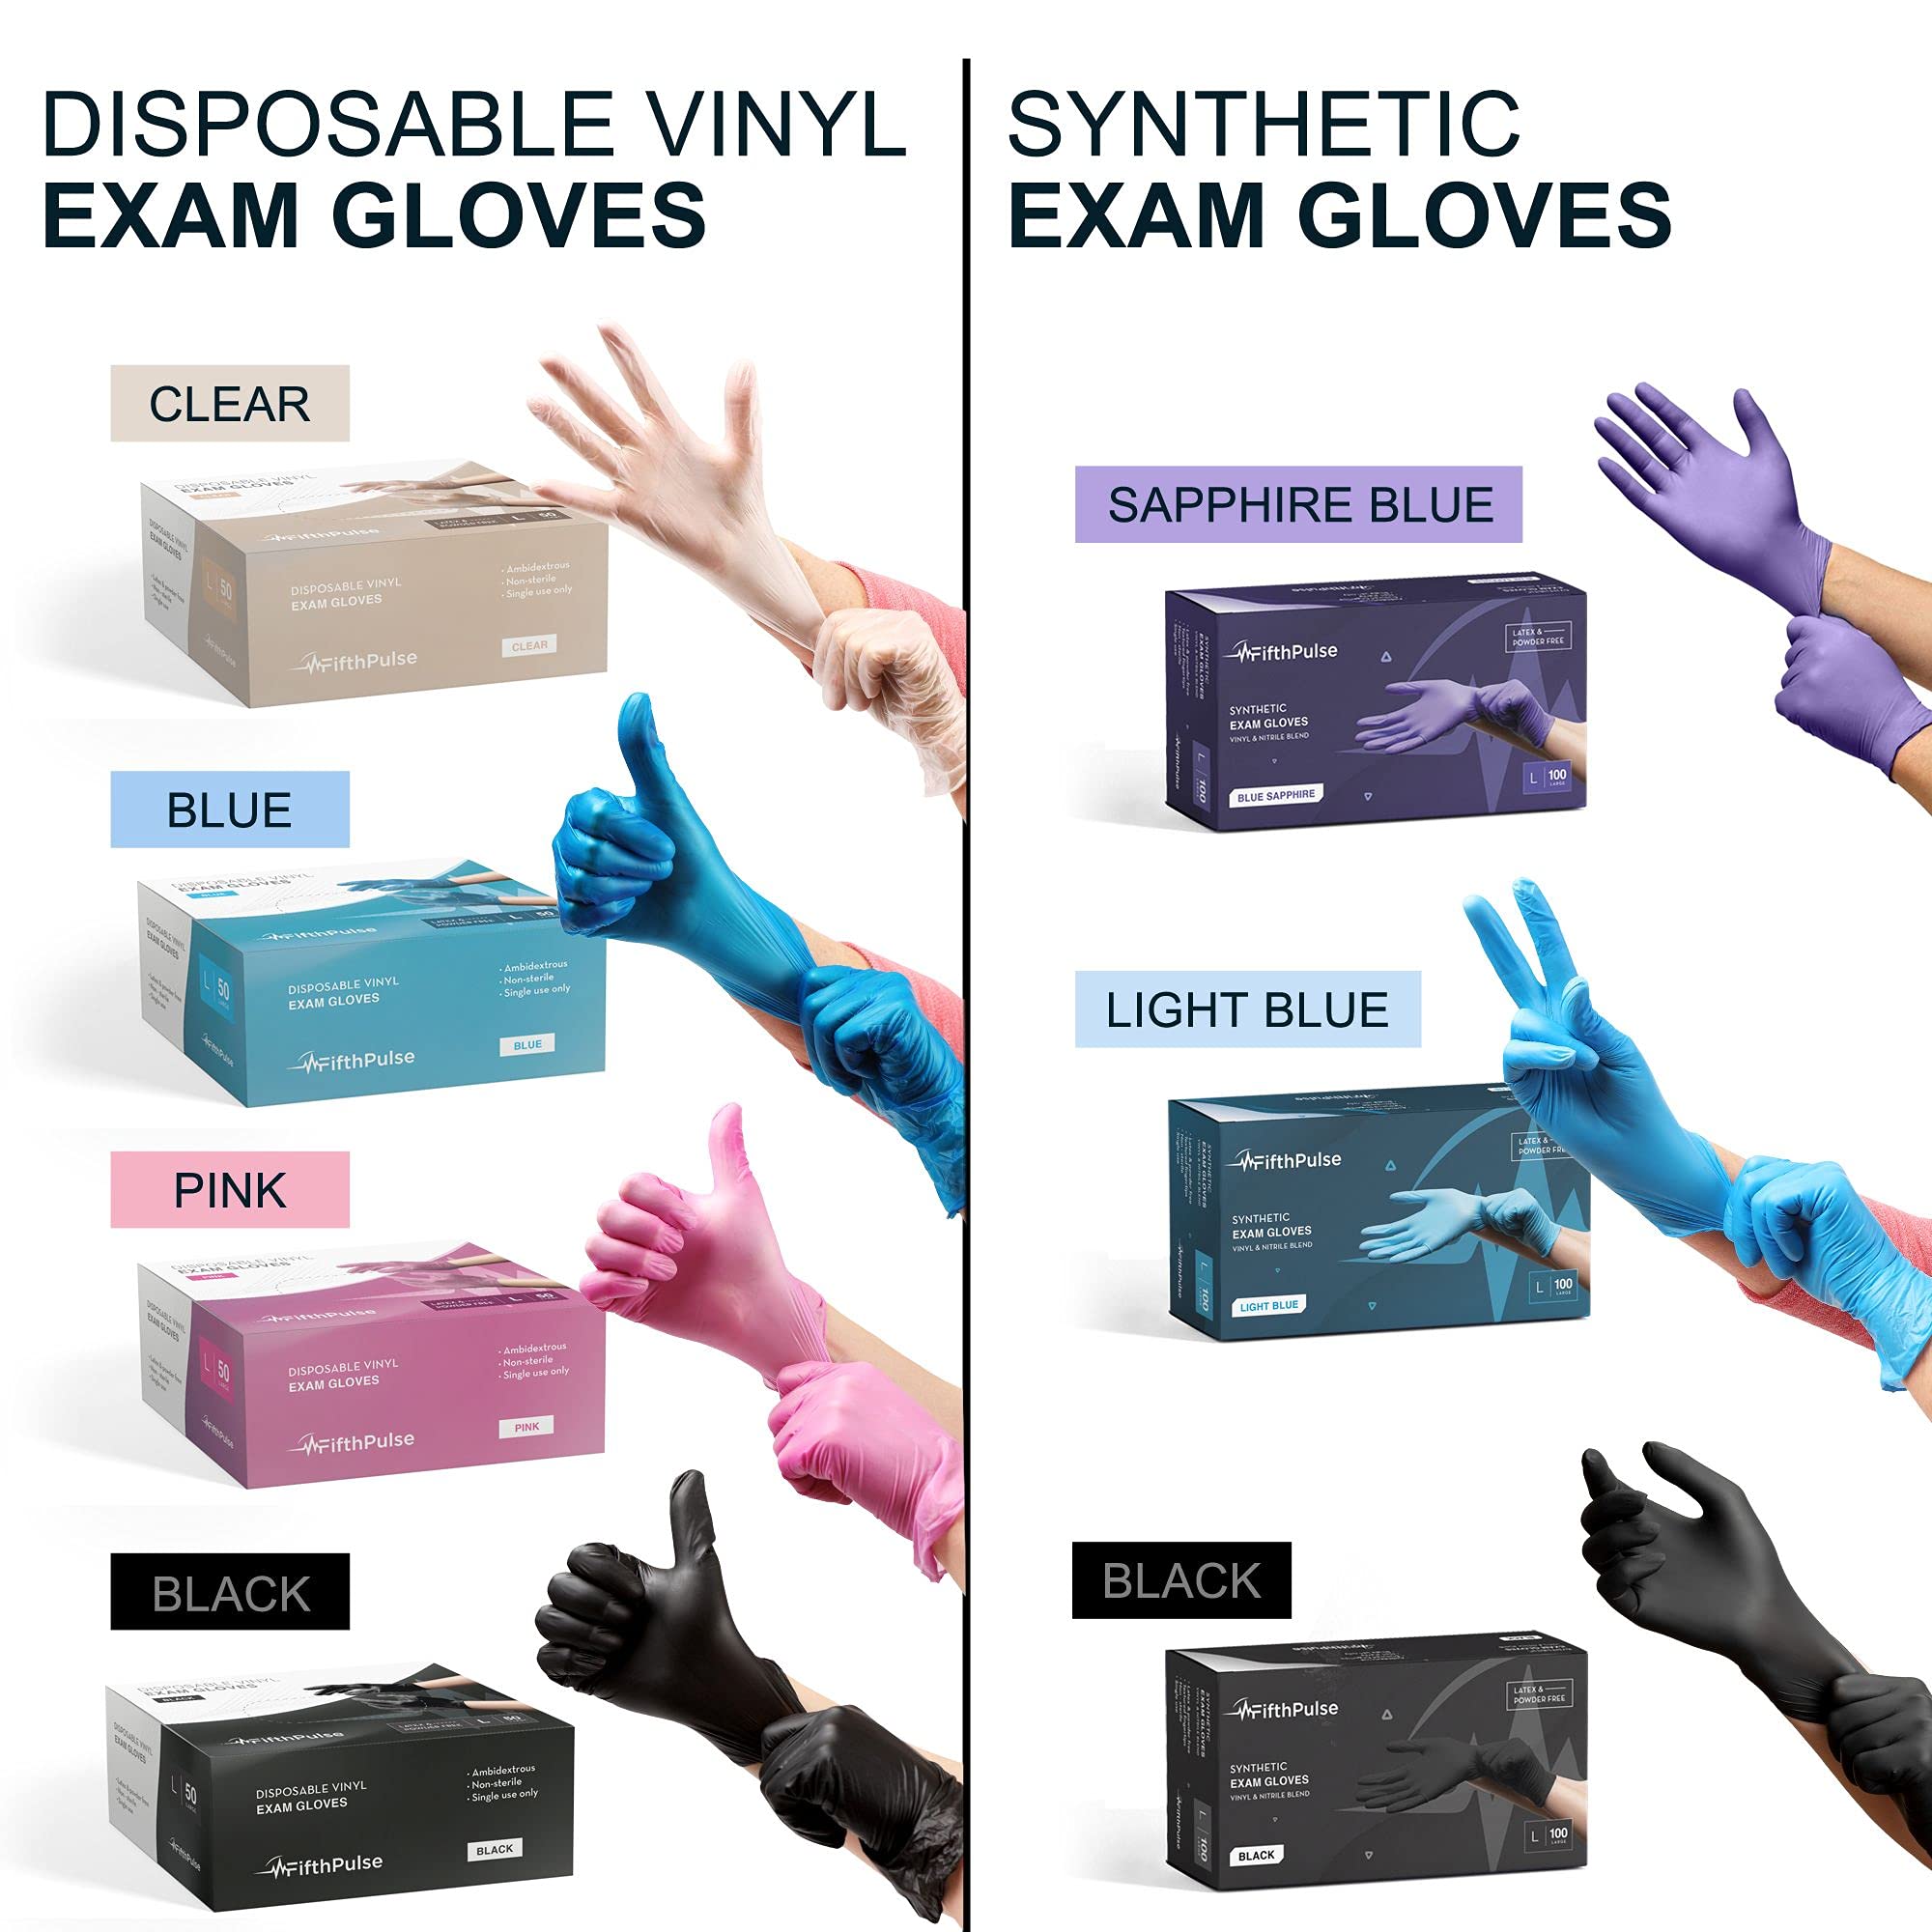 FifthPulse Black Vinyl Disposable Gloves Large 50 Pack - Latex Free, Powder Free Medical Exam Gloves - Surgical, Home, Cleaning, and Food Gloves - 3 Mil Thickness